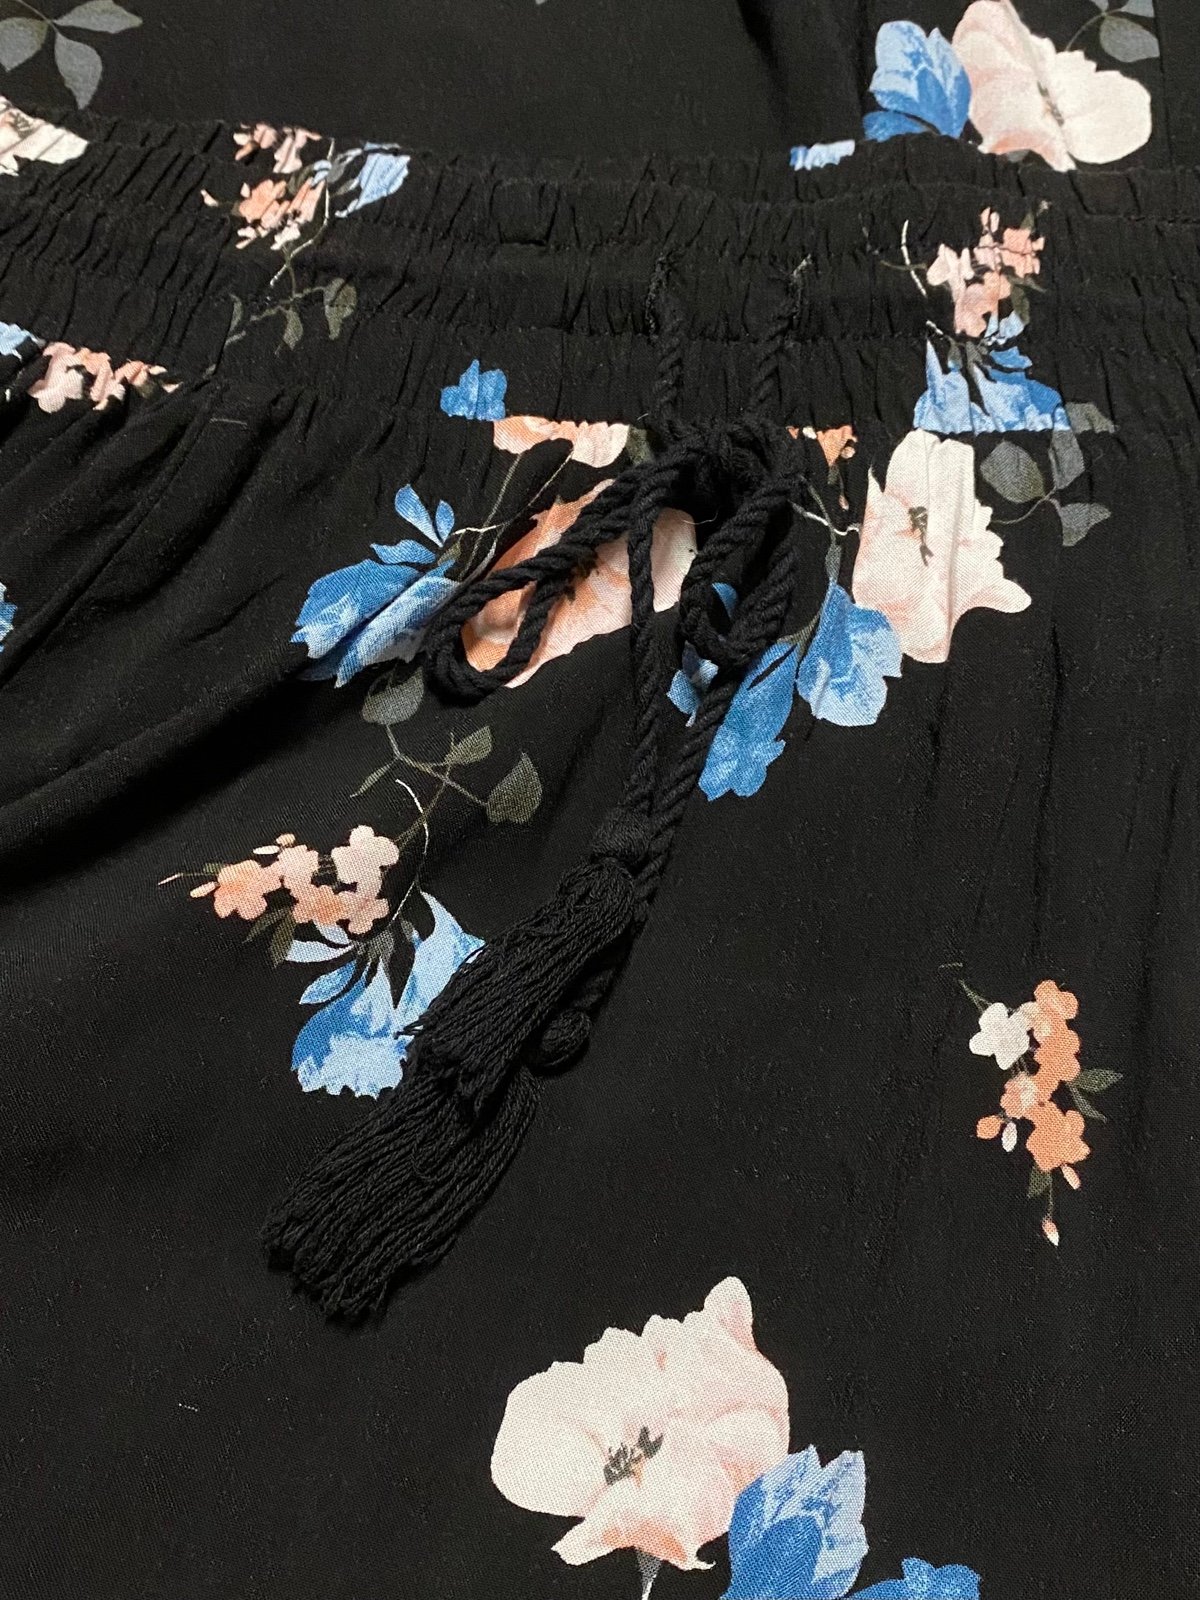 The Best Seller Torrid Maxi Challis Skirt Floral Black Front Slits Stretchy Waist Casual mIEgJF7Ia Cheap